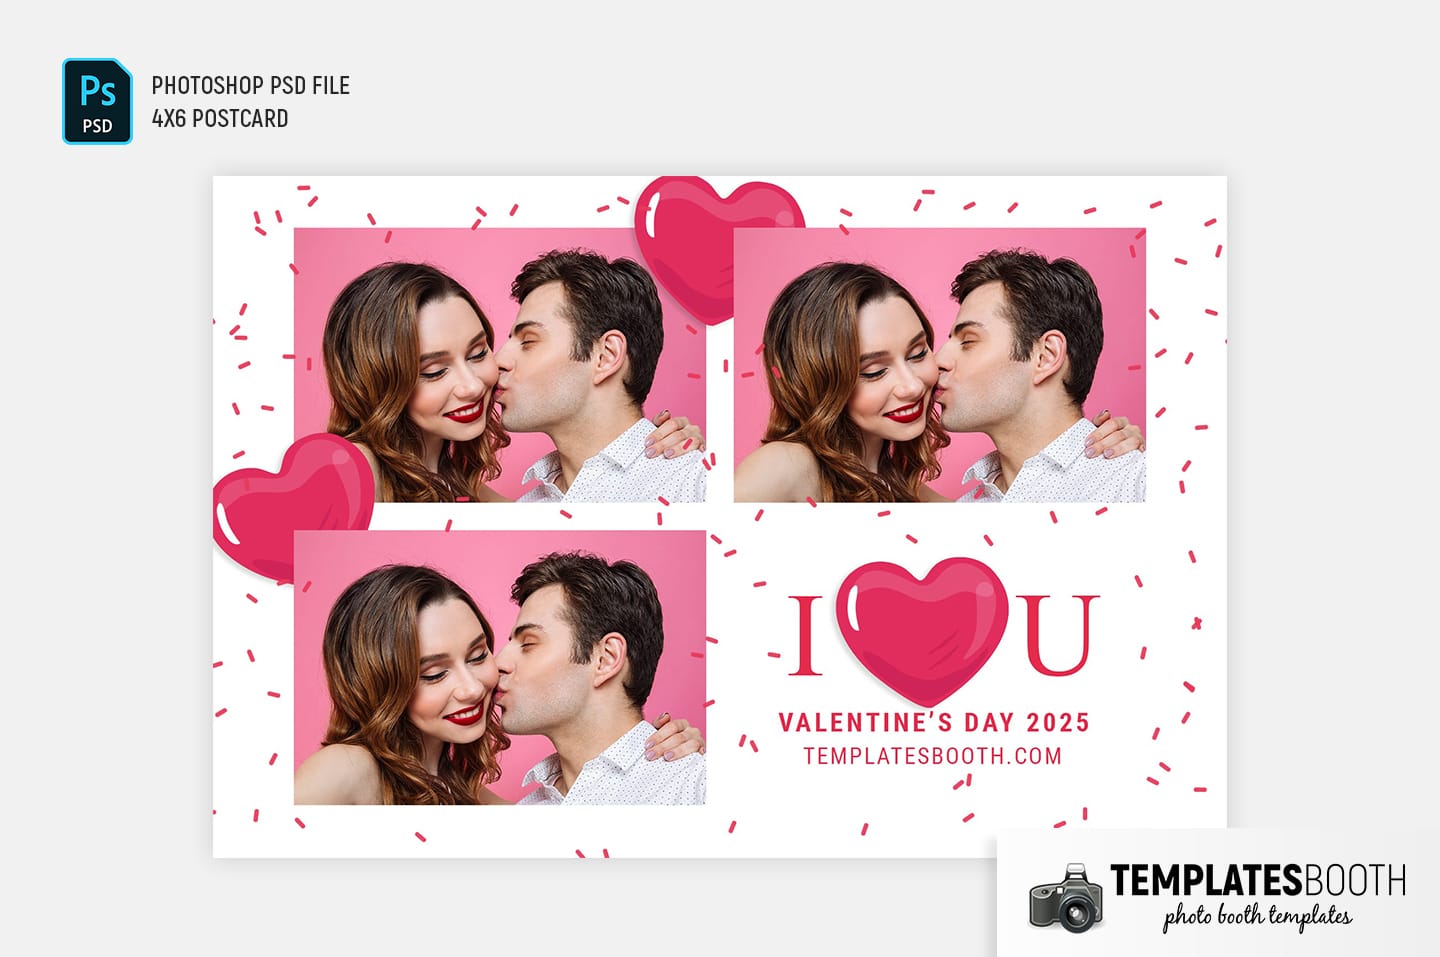 I Love You Valentine's Day Photo Booth Template (4x6 postcard)